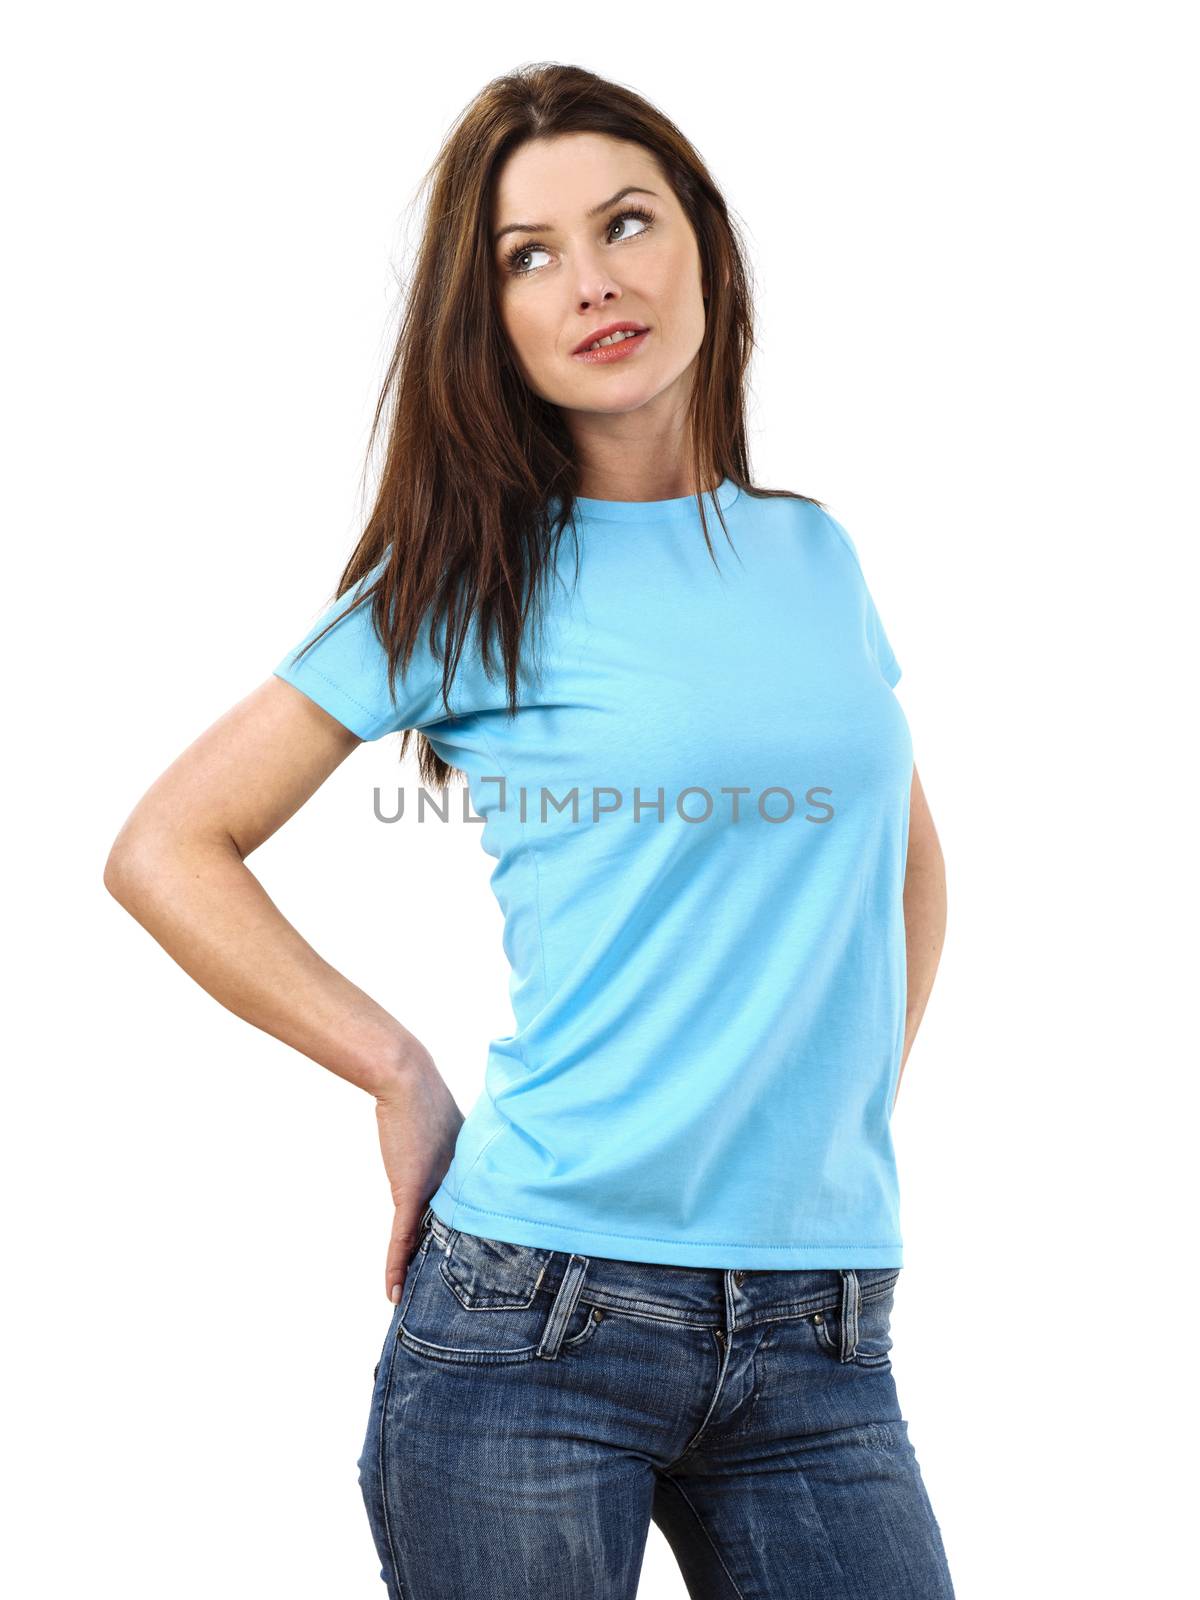 Photo of a beautiful brunette woman posing with a blank light blue t-shirt, ready for your artwork or design.